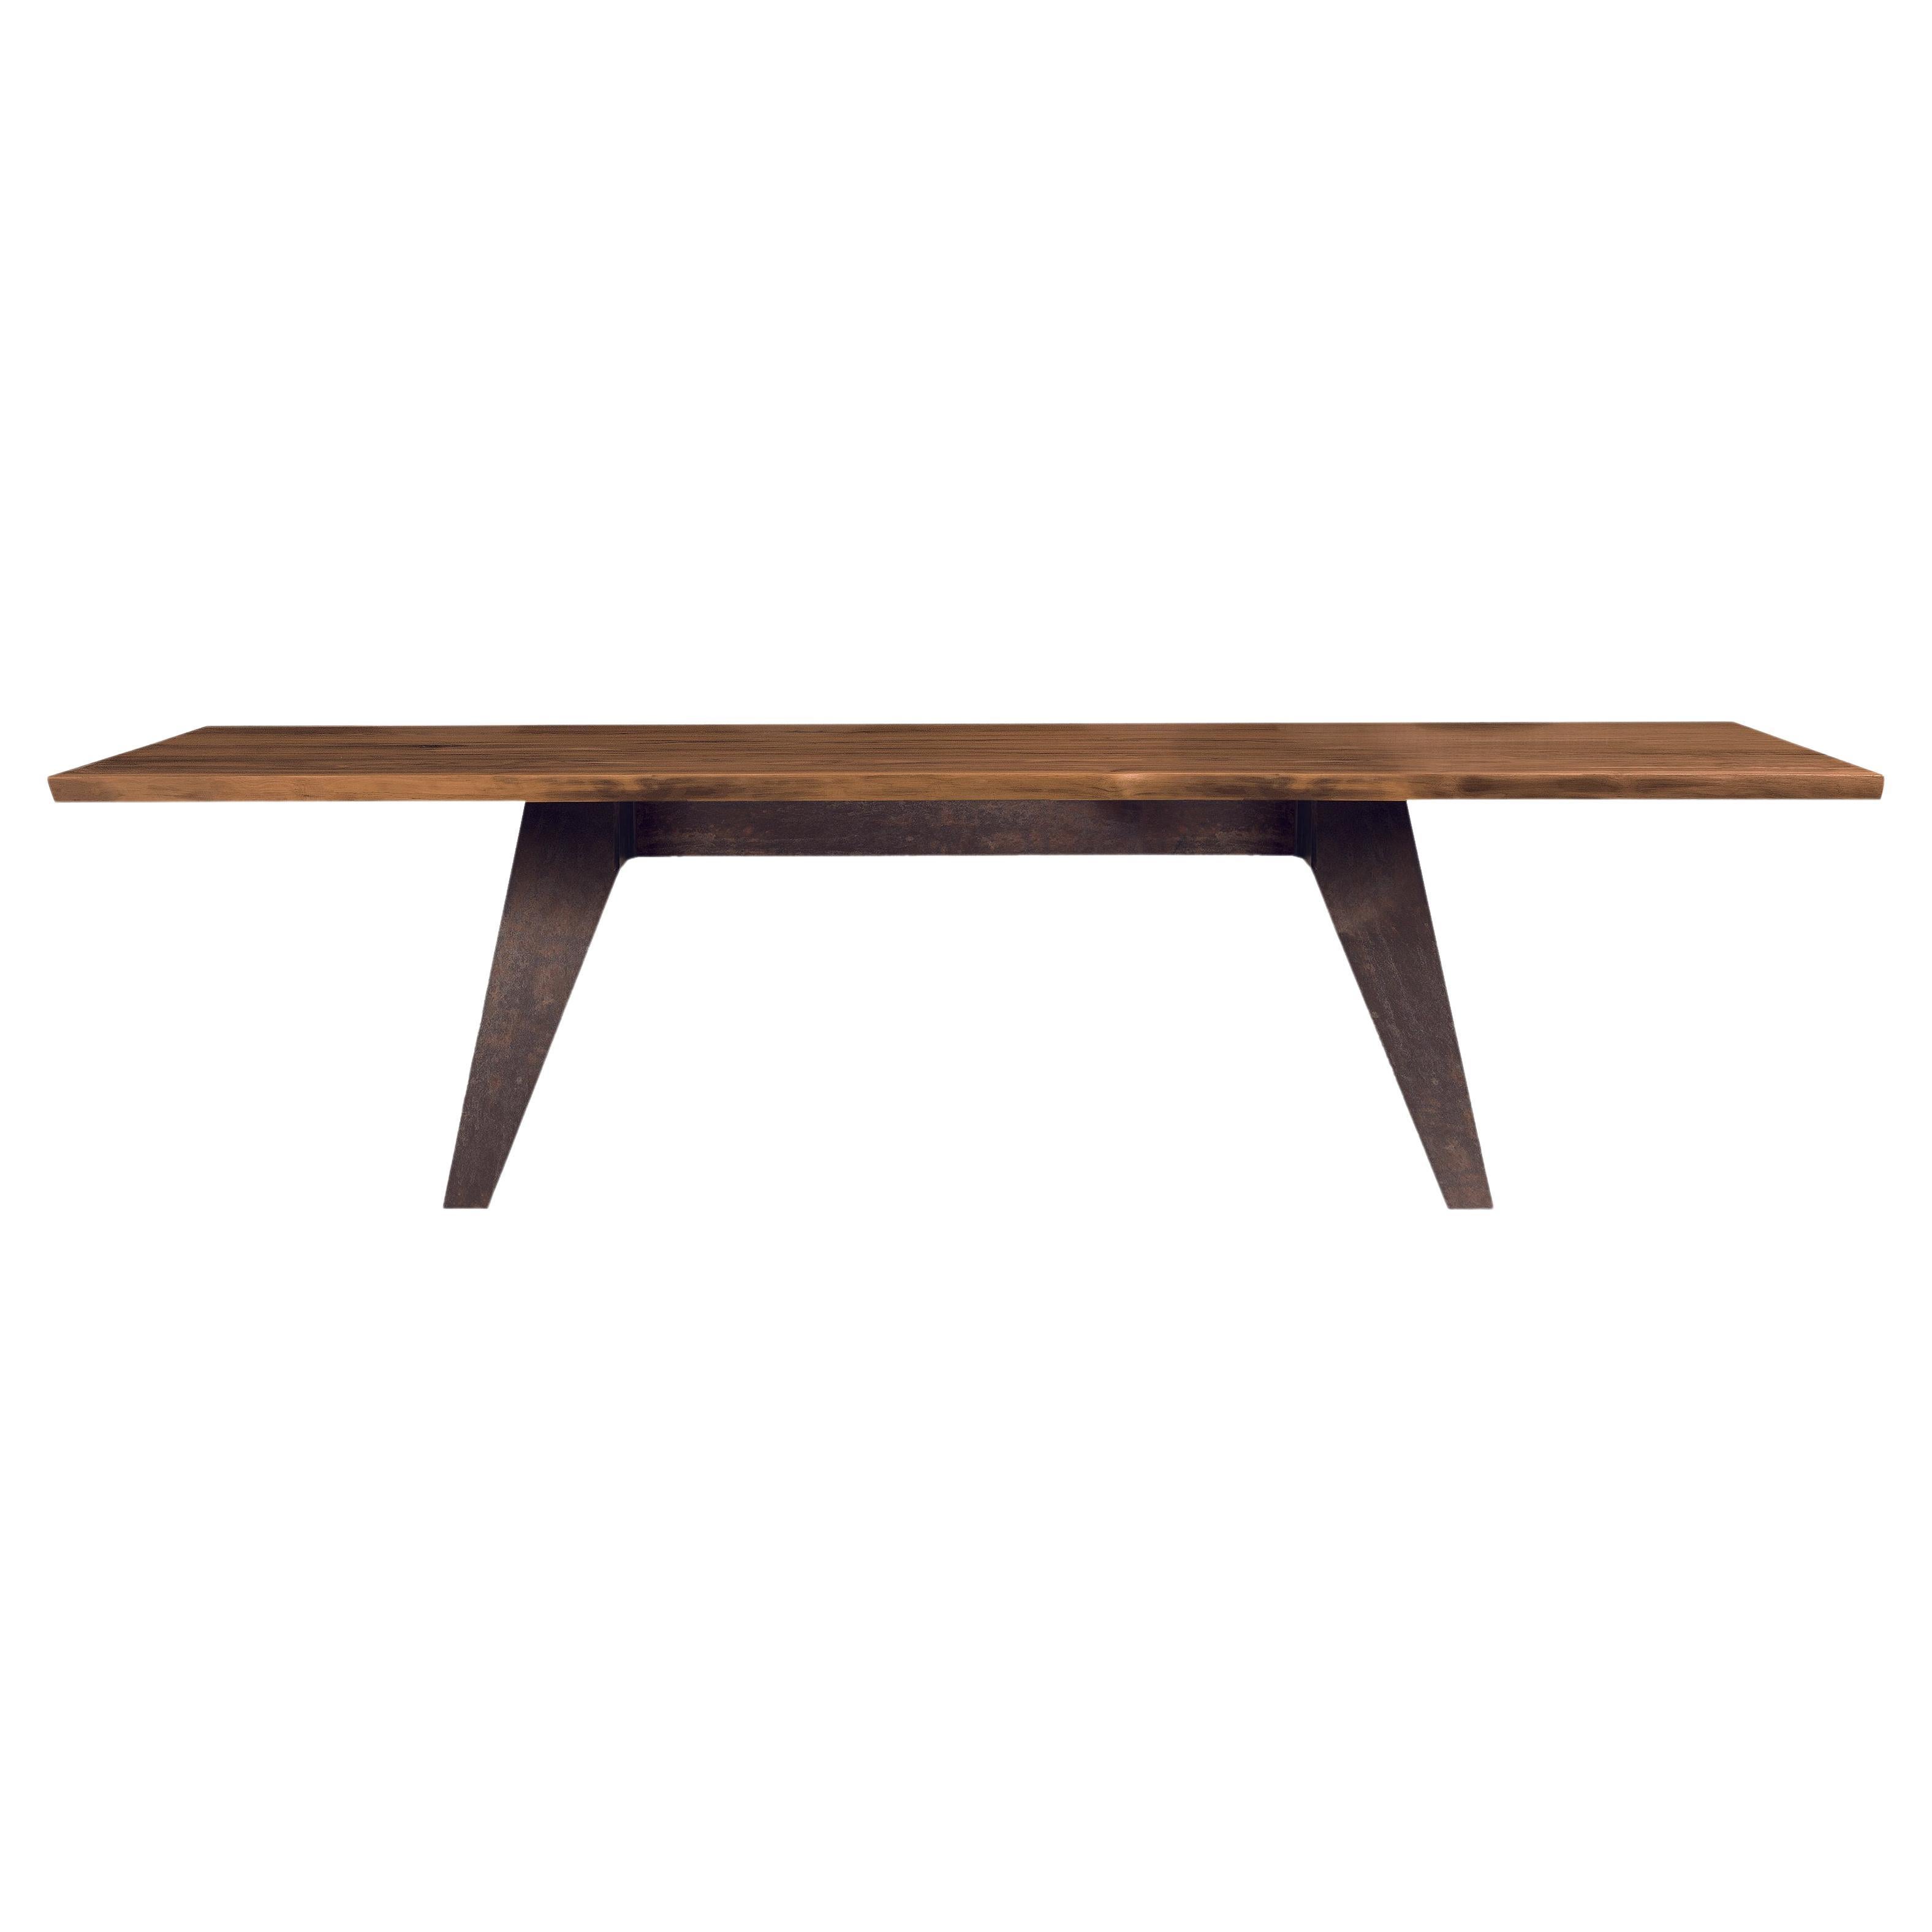 Misura Solid Wood Table, Walnut in Hand-Made Natural Finish, Contemporary